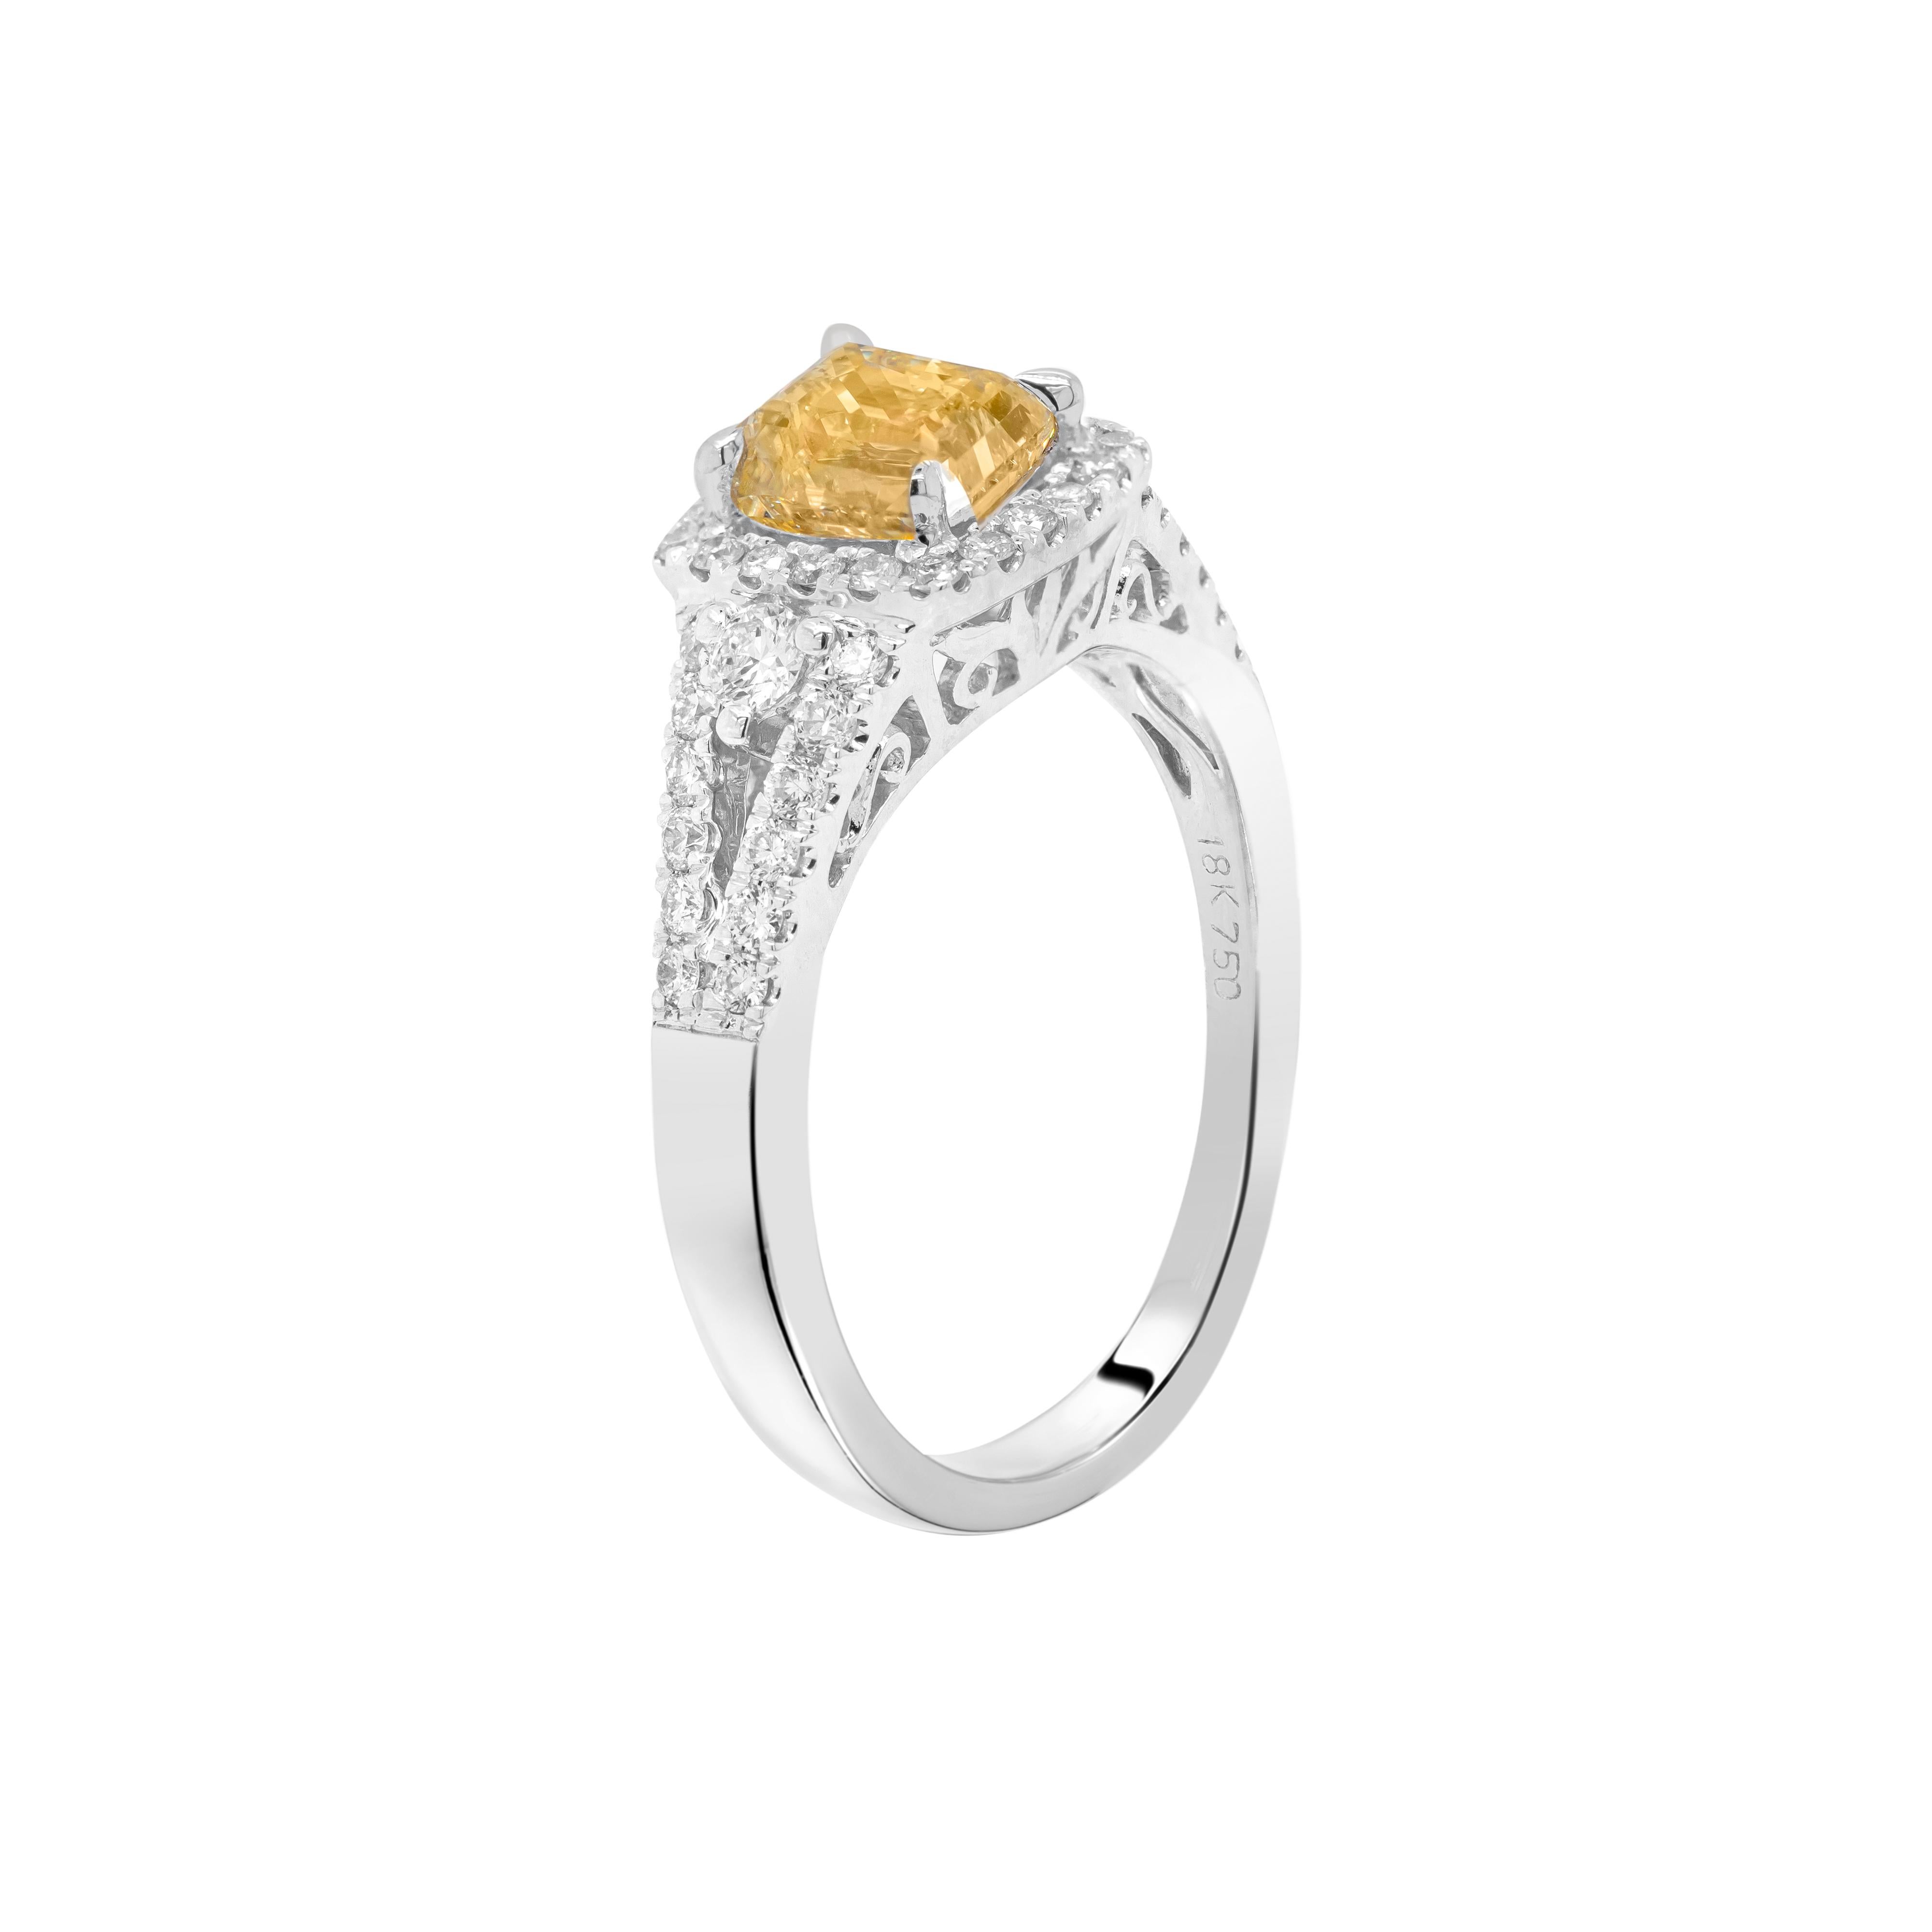 This wonderful 18 carat white gold engagement ring features a beautiful 'variation emerald cut' shaped fancy yellow diamond weighing 1.02ct, mounted in a four claw, open back setting. The exquisite stone is surrounded by a halo of fine round